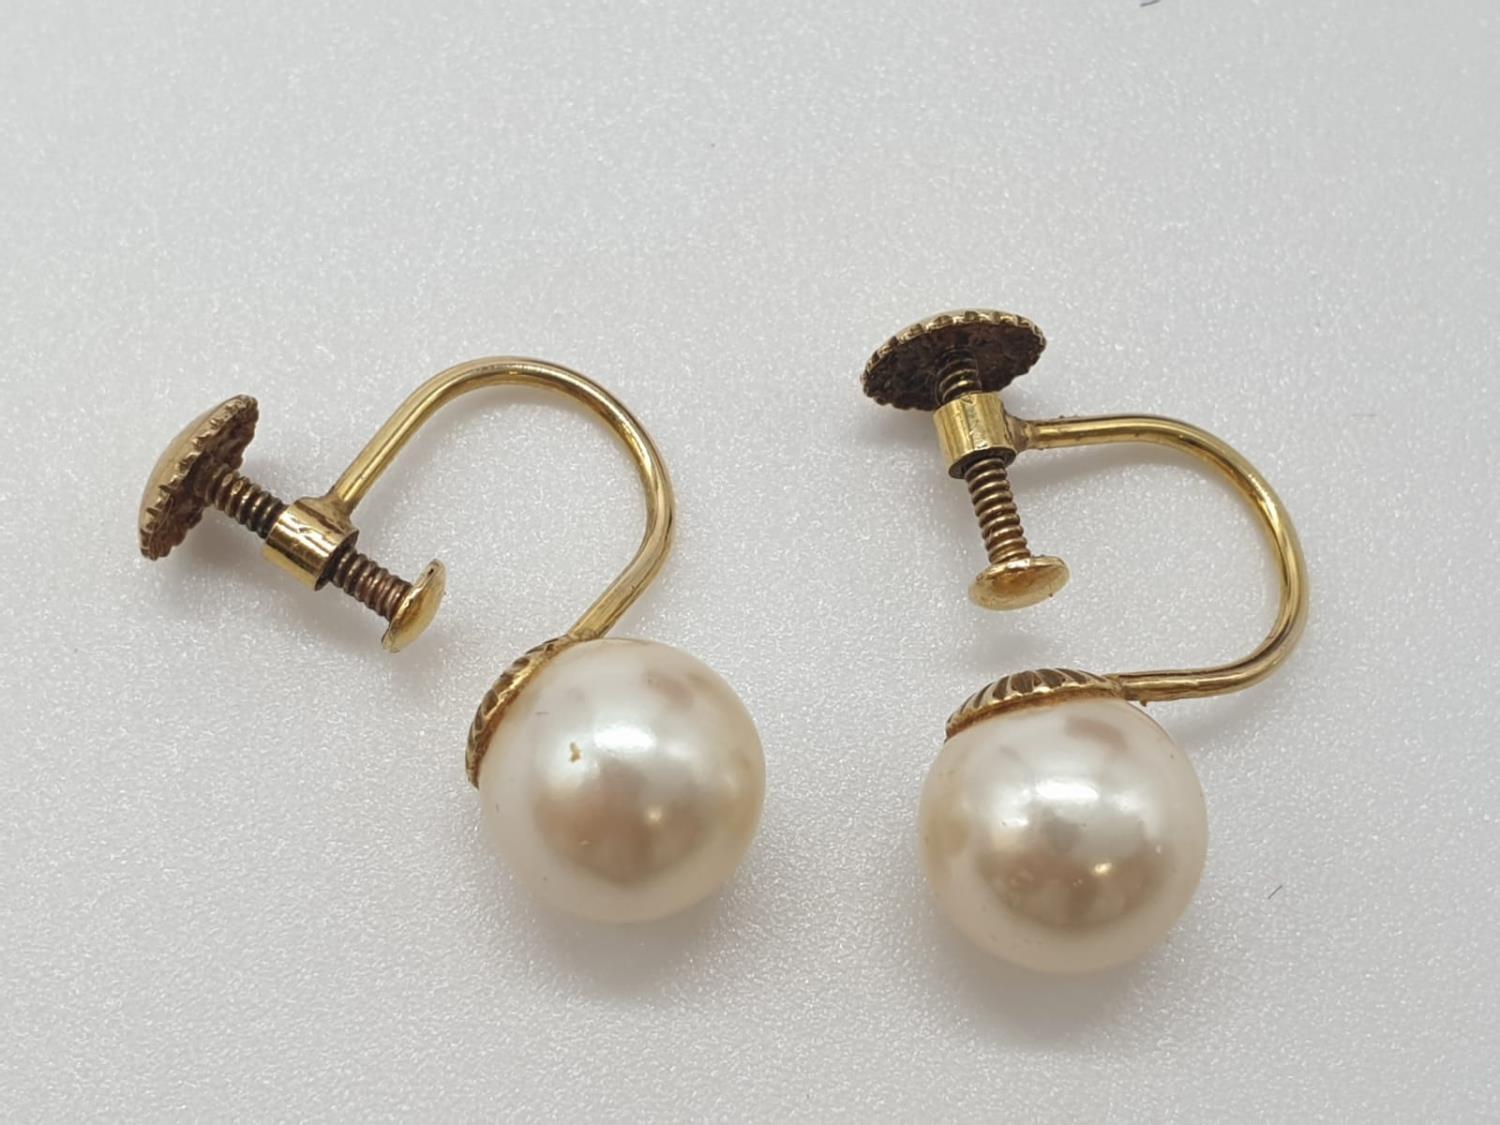 9ct gold vintage pearl earrings, having screw fitting and marked for 9ct, original box and good